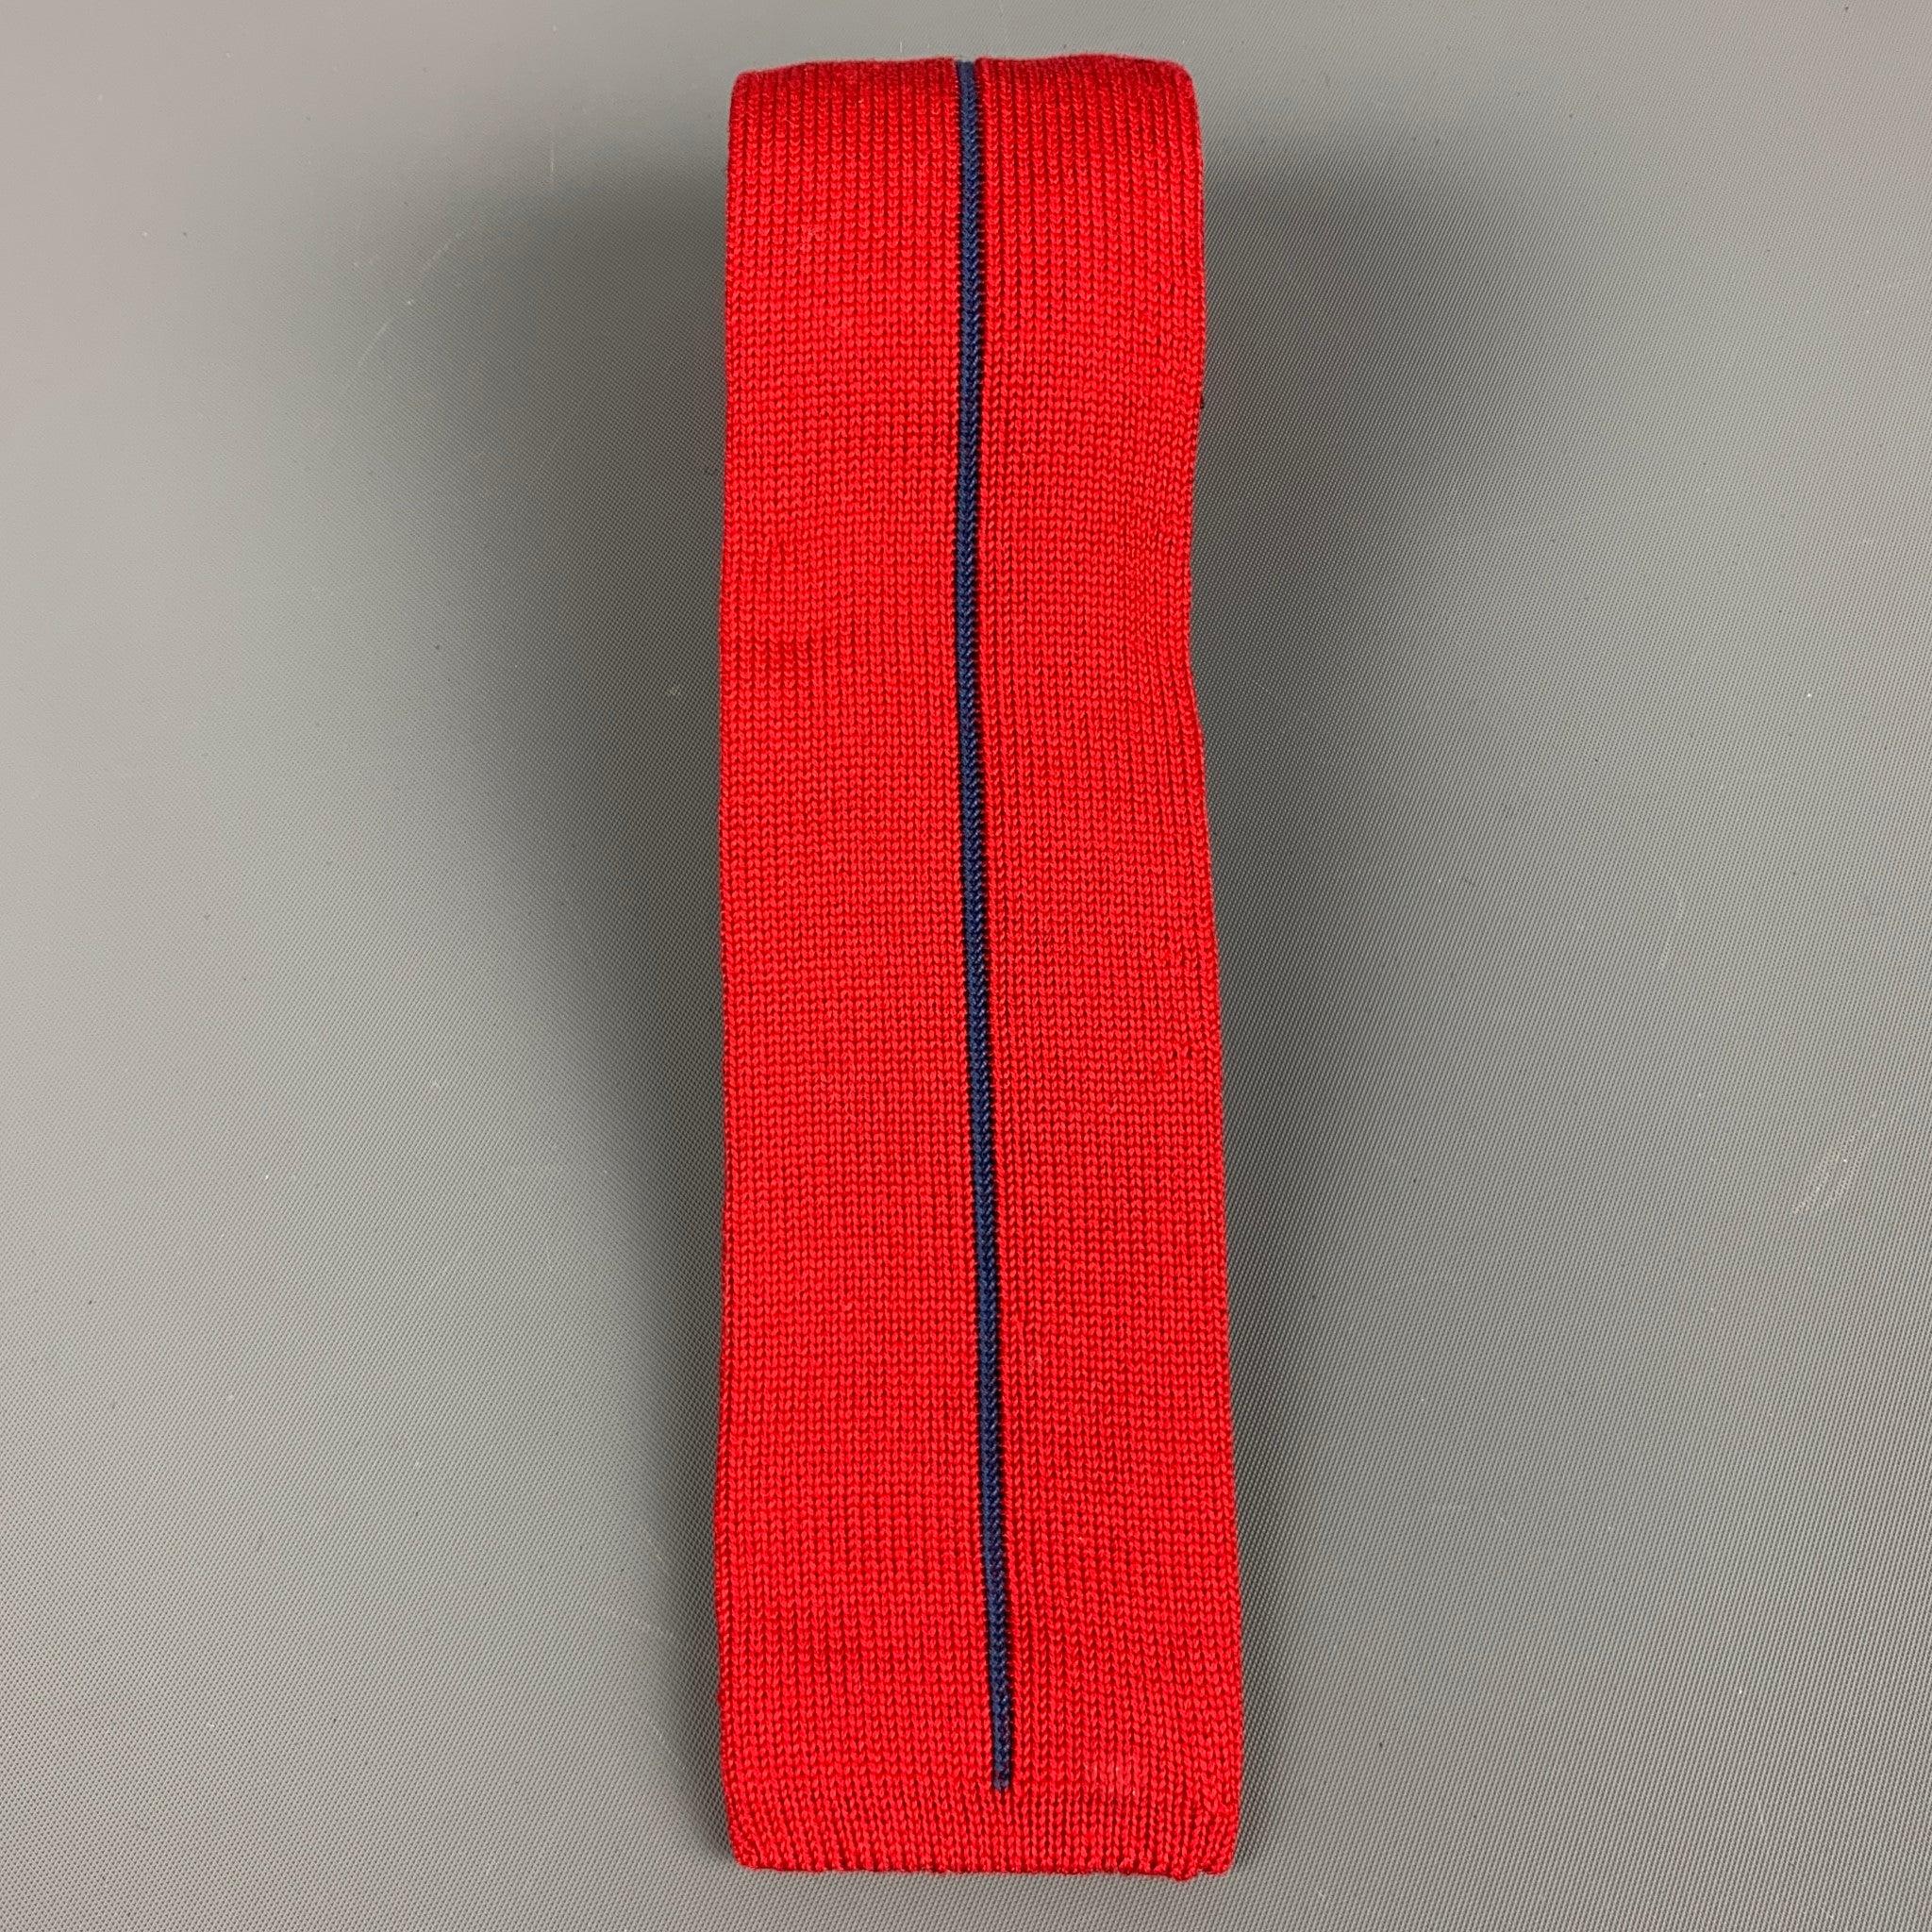 CLAUDE MONTANA
necktie in a red cotton knit fabric featuring skinny vertical blue stripe. Made in Italy.Excellent Pre-Owned Condition. 

Measurements: 
  Width: 2 inches Length: 49 inches 
  
  
 
Reference: 127989
Category: Tie
More Details
   